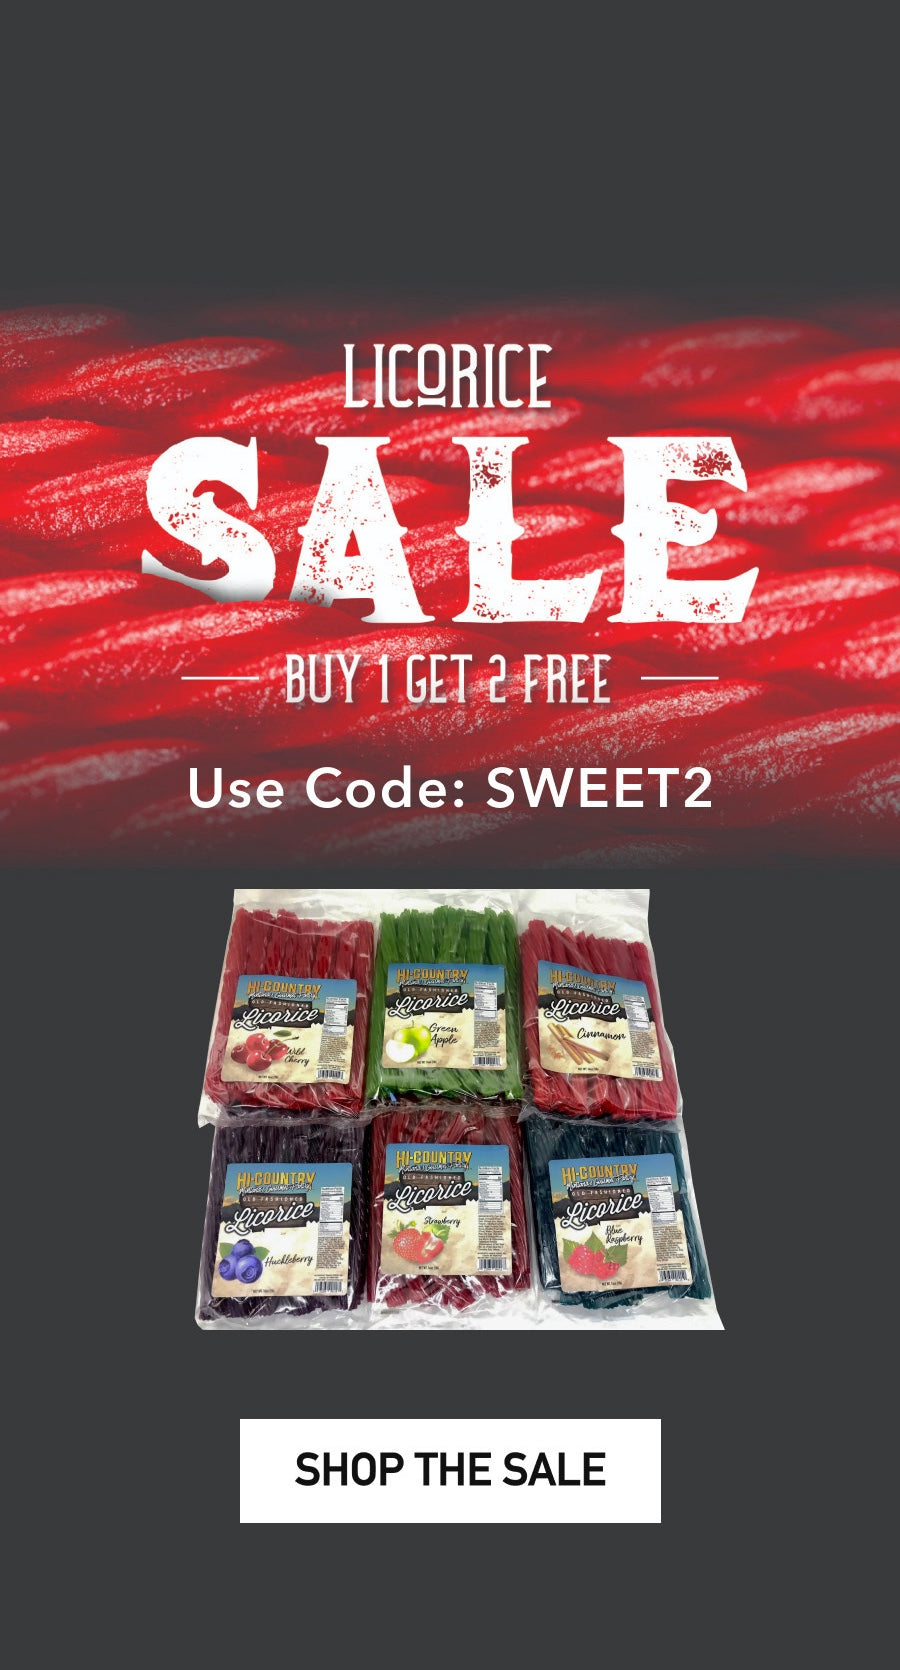 HiCountry-Licorice-Sale Buy 1 Get 2 Free - Use Code: SWEET2 - Shop The Sale